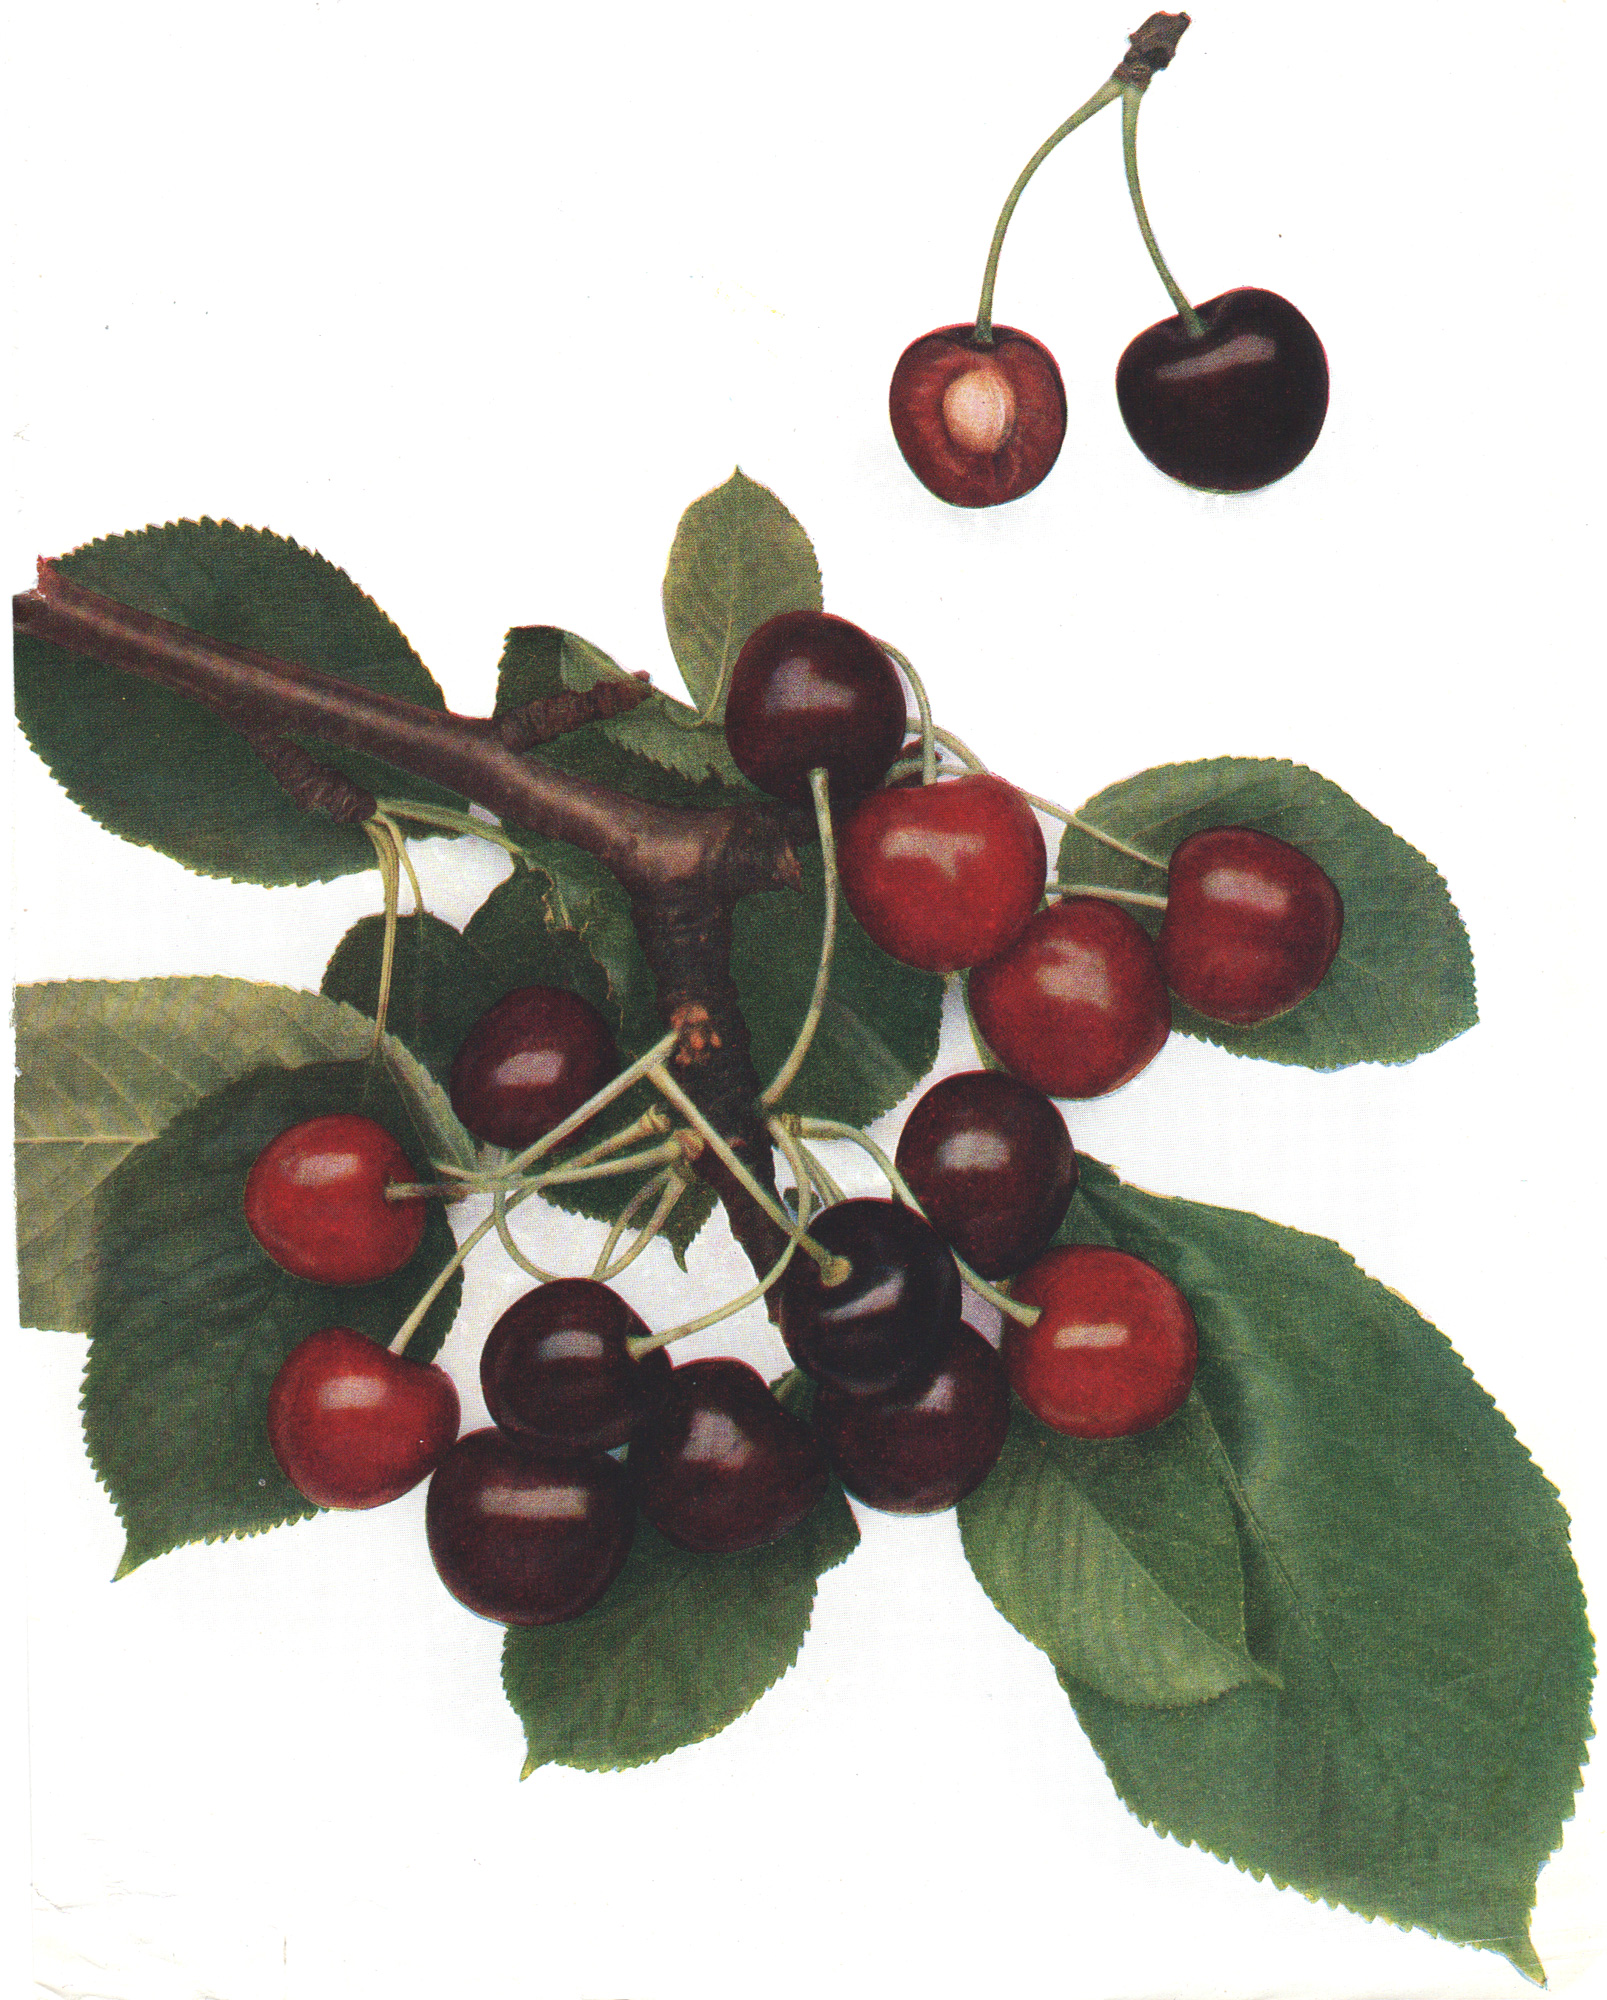 Grubb, Norman H. – The Cherries and Plums of England